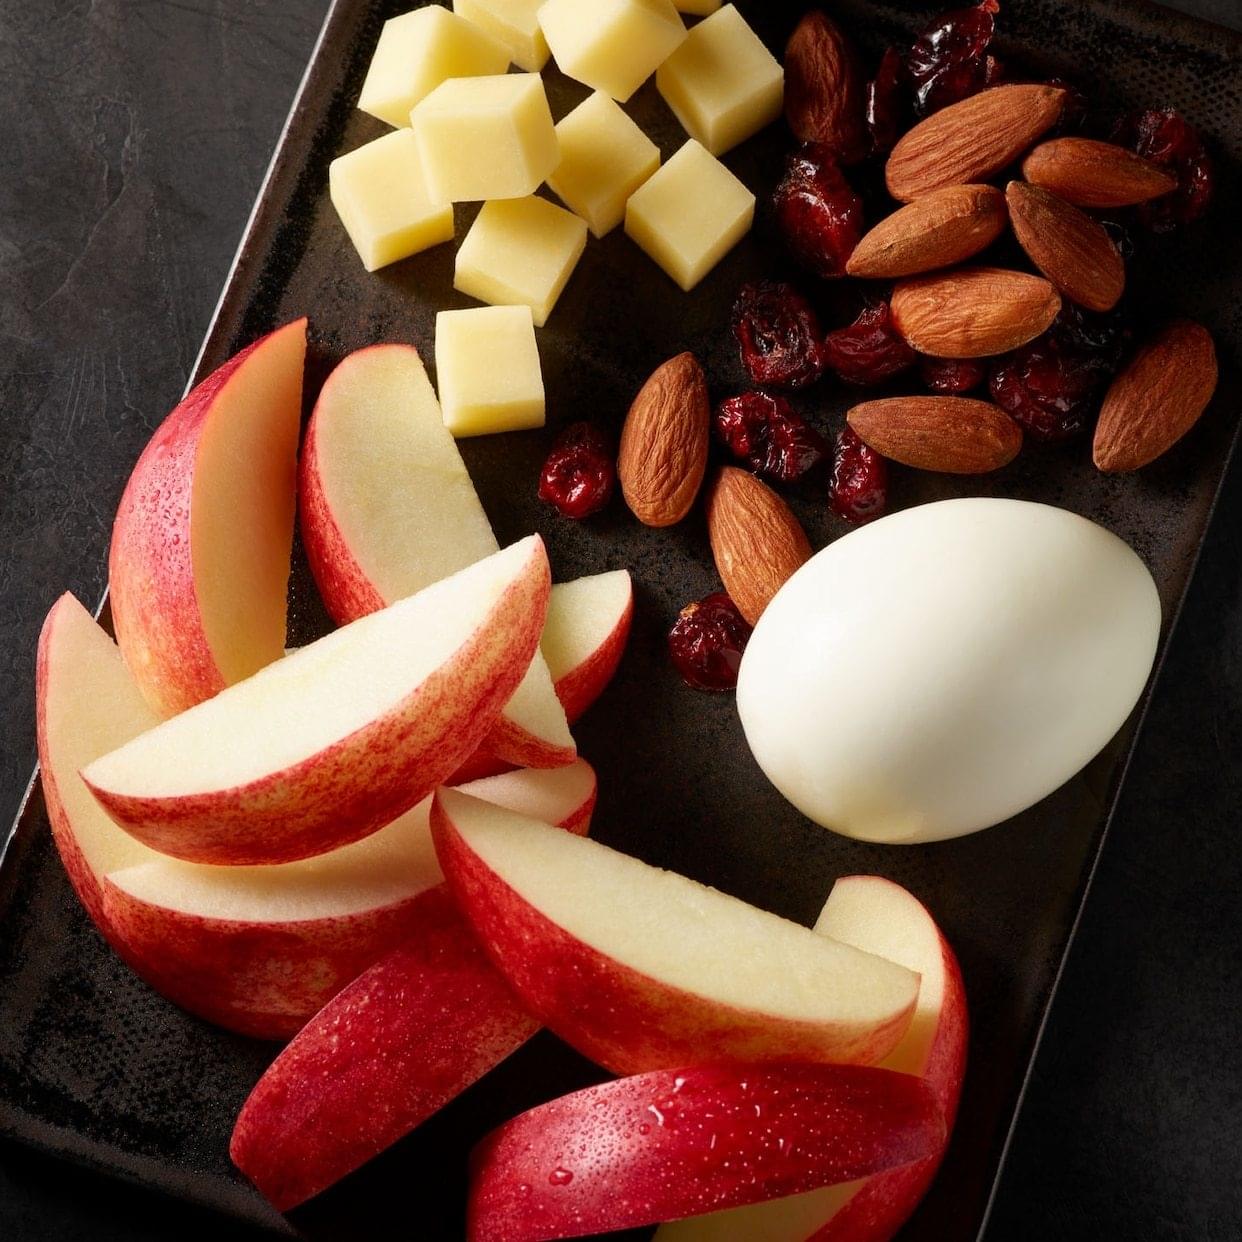 Starbucks Prosnax Gala Apples, Egg, White Cheddar Cheese, and Almonds Snack Box Nutrition Facts